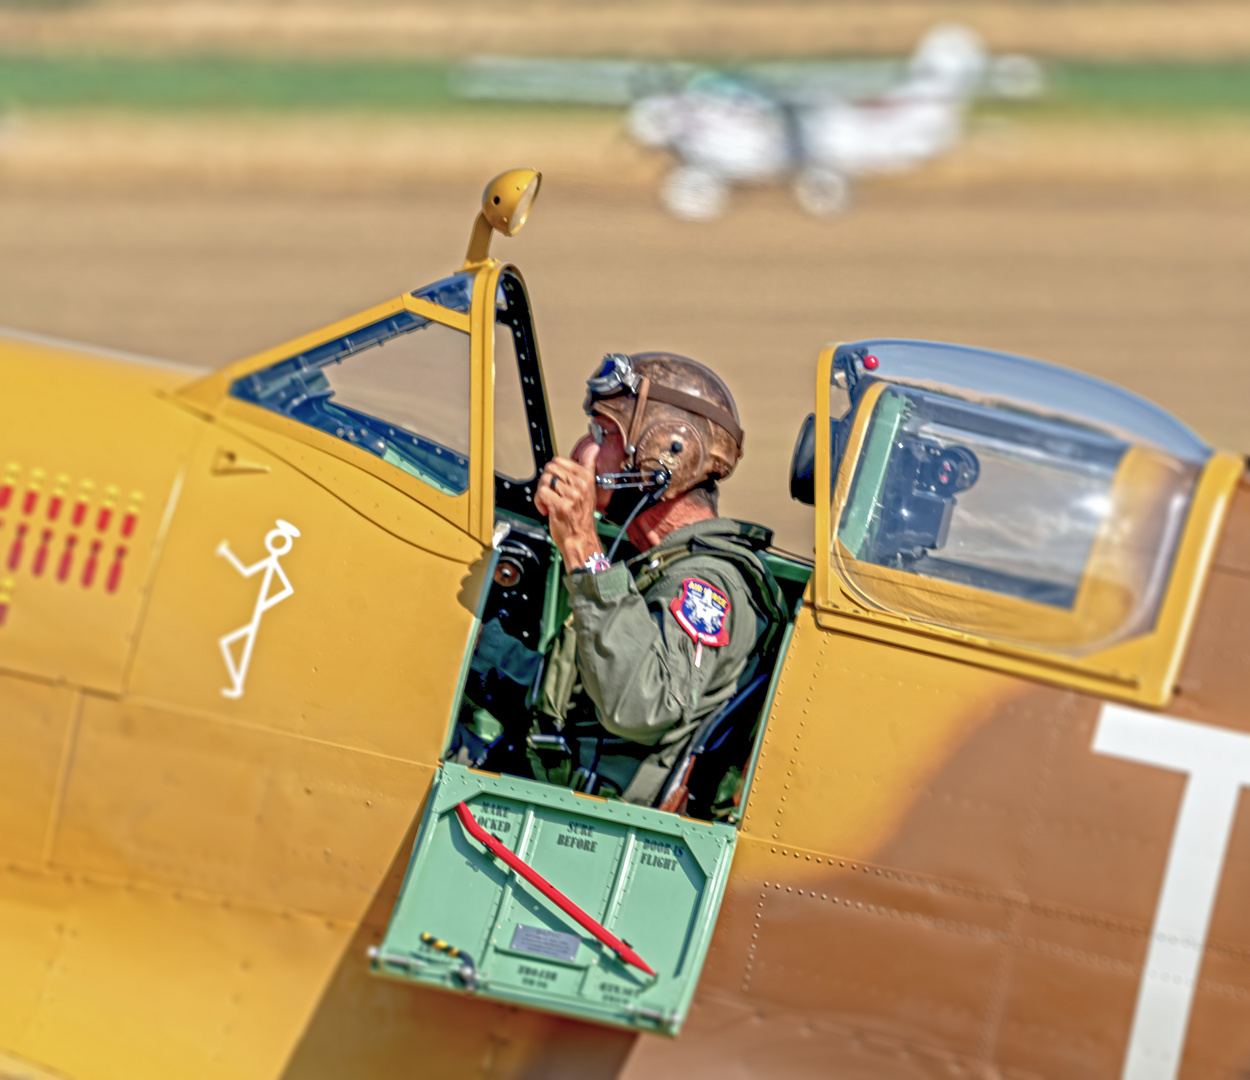 Duxford Airshow Flying Legends  2018 